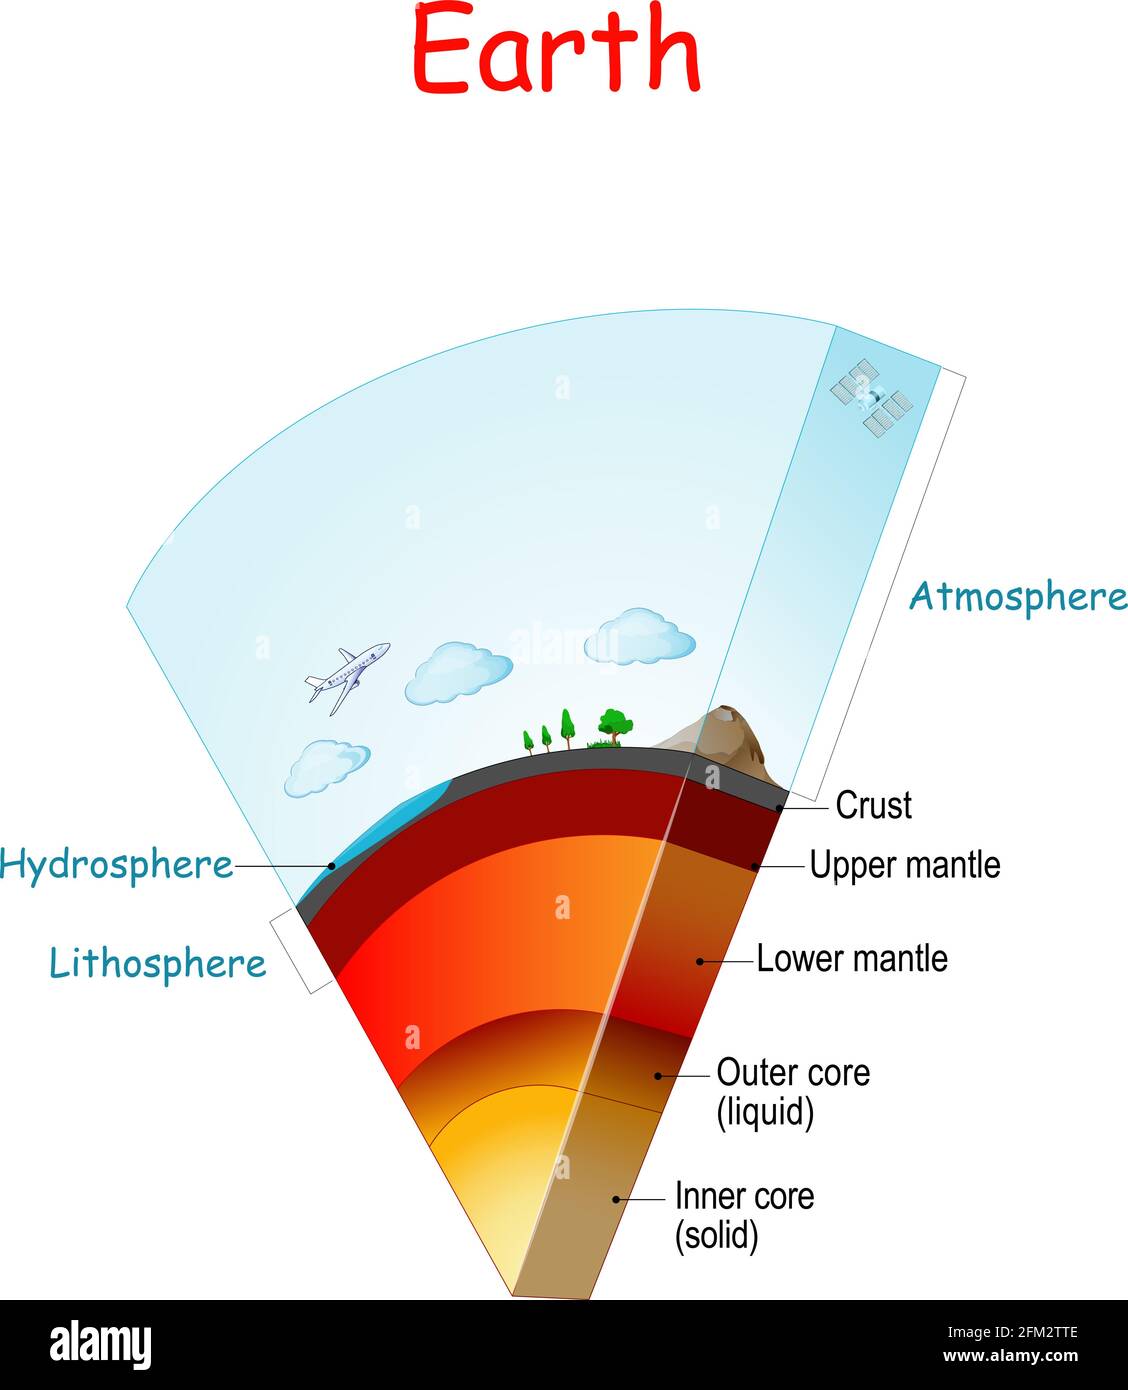 Earth structure and layers. From Lithosphere and Hydrosphere to atmosphere. Earth internal structure: core (solid, liquid), mantle (Lower, Upper) Stock Vector